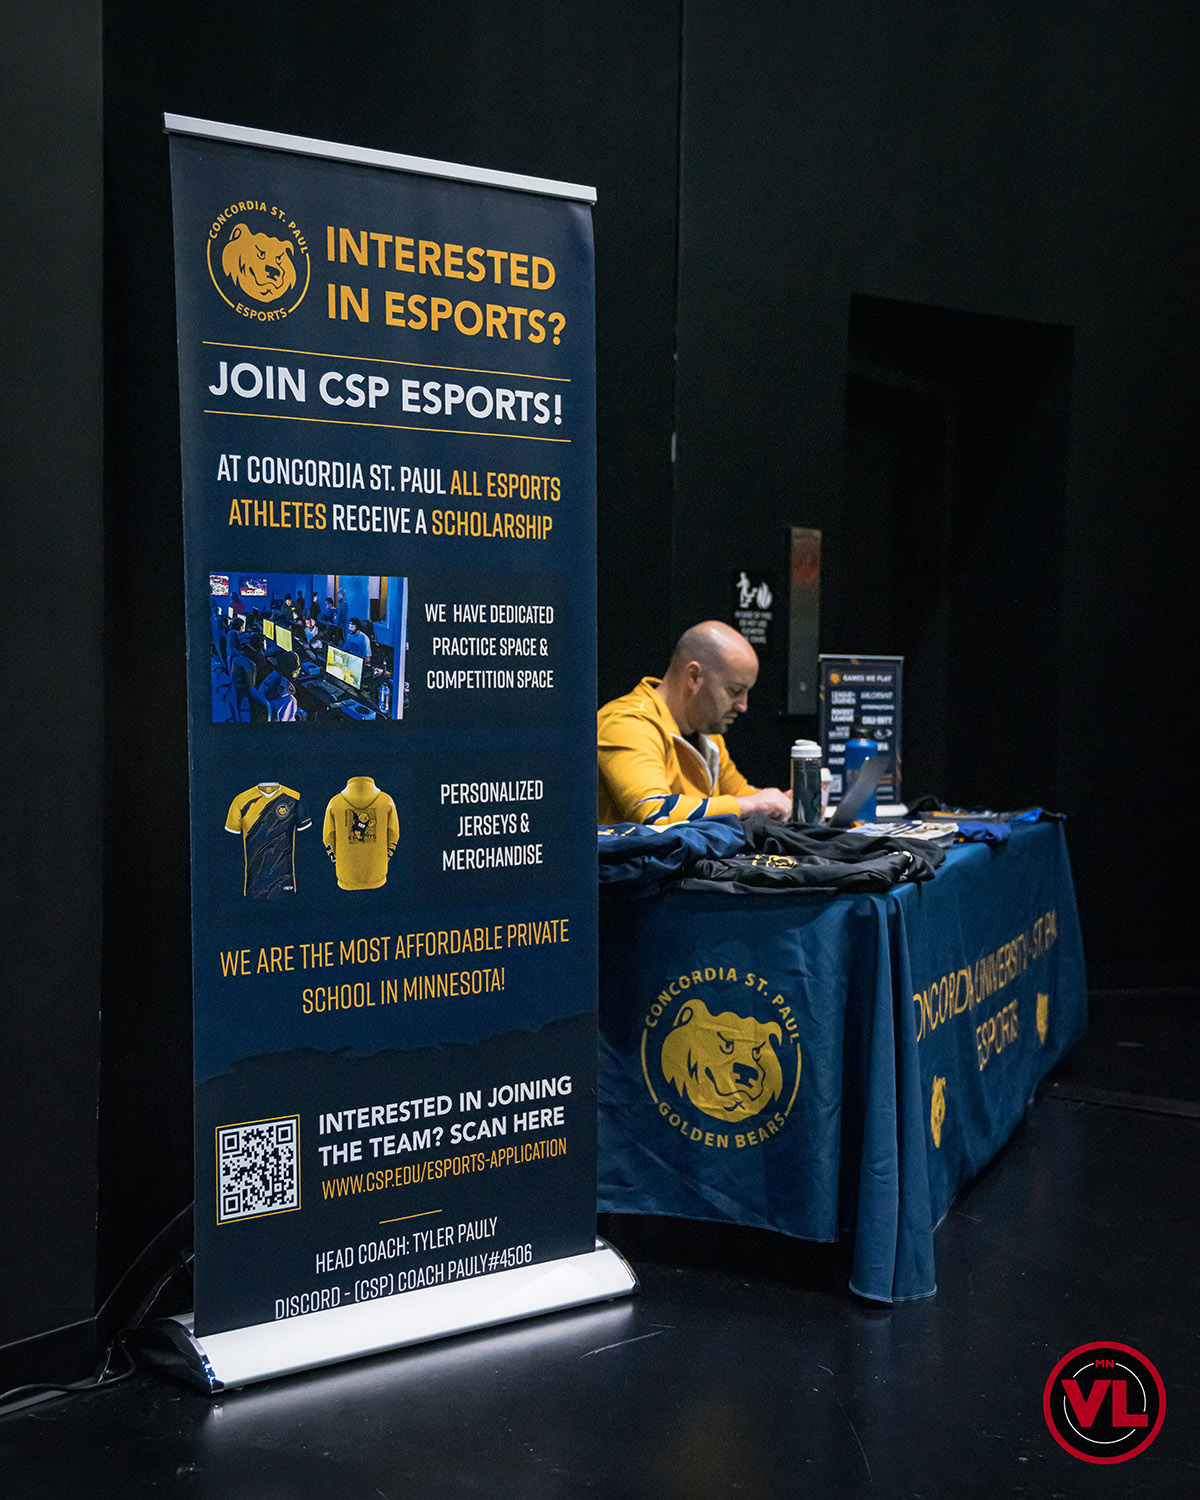 Esports coach sitting at an information table booth.